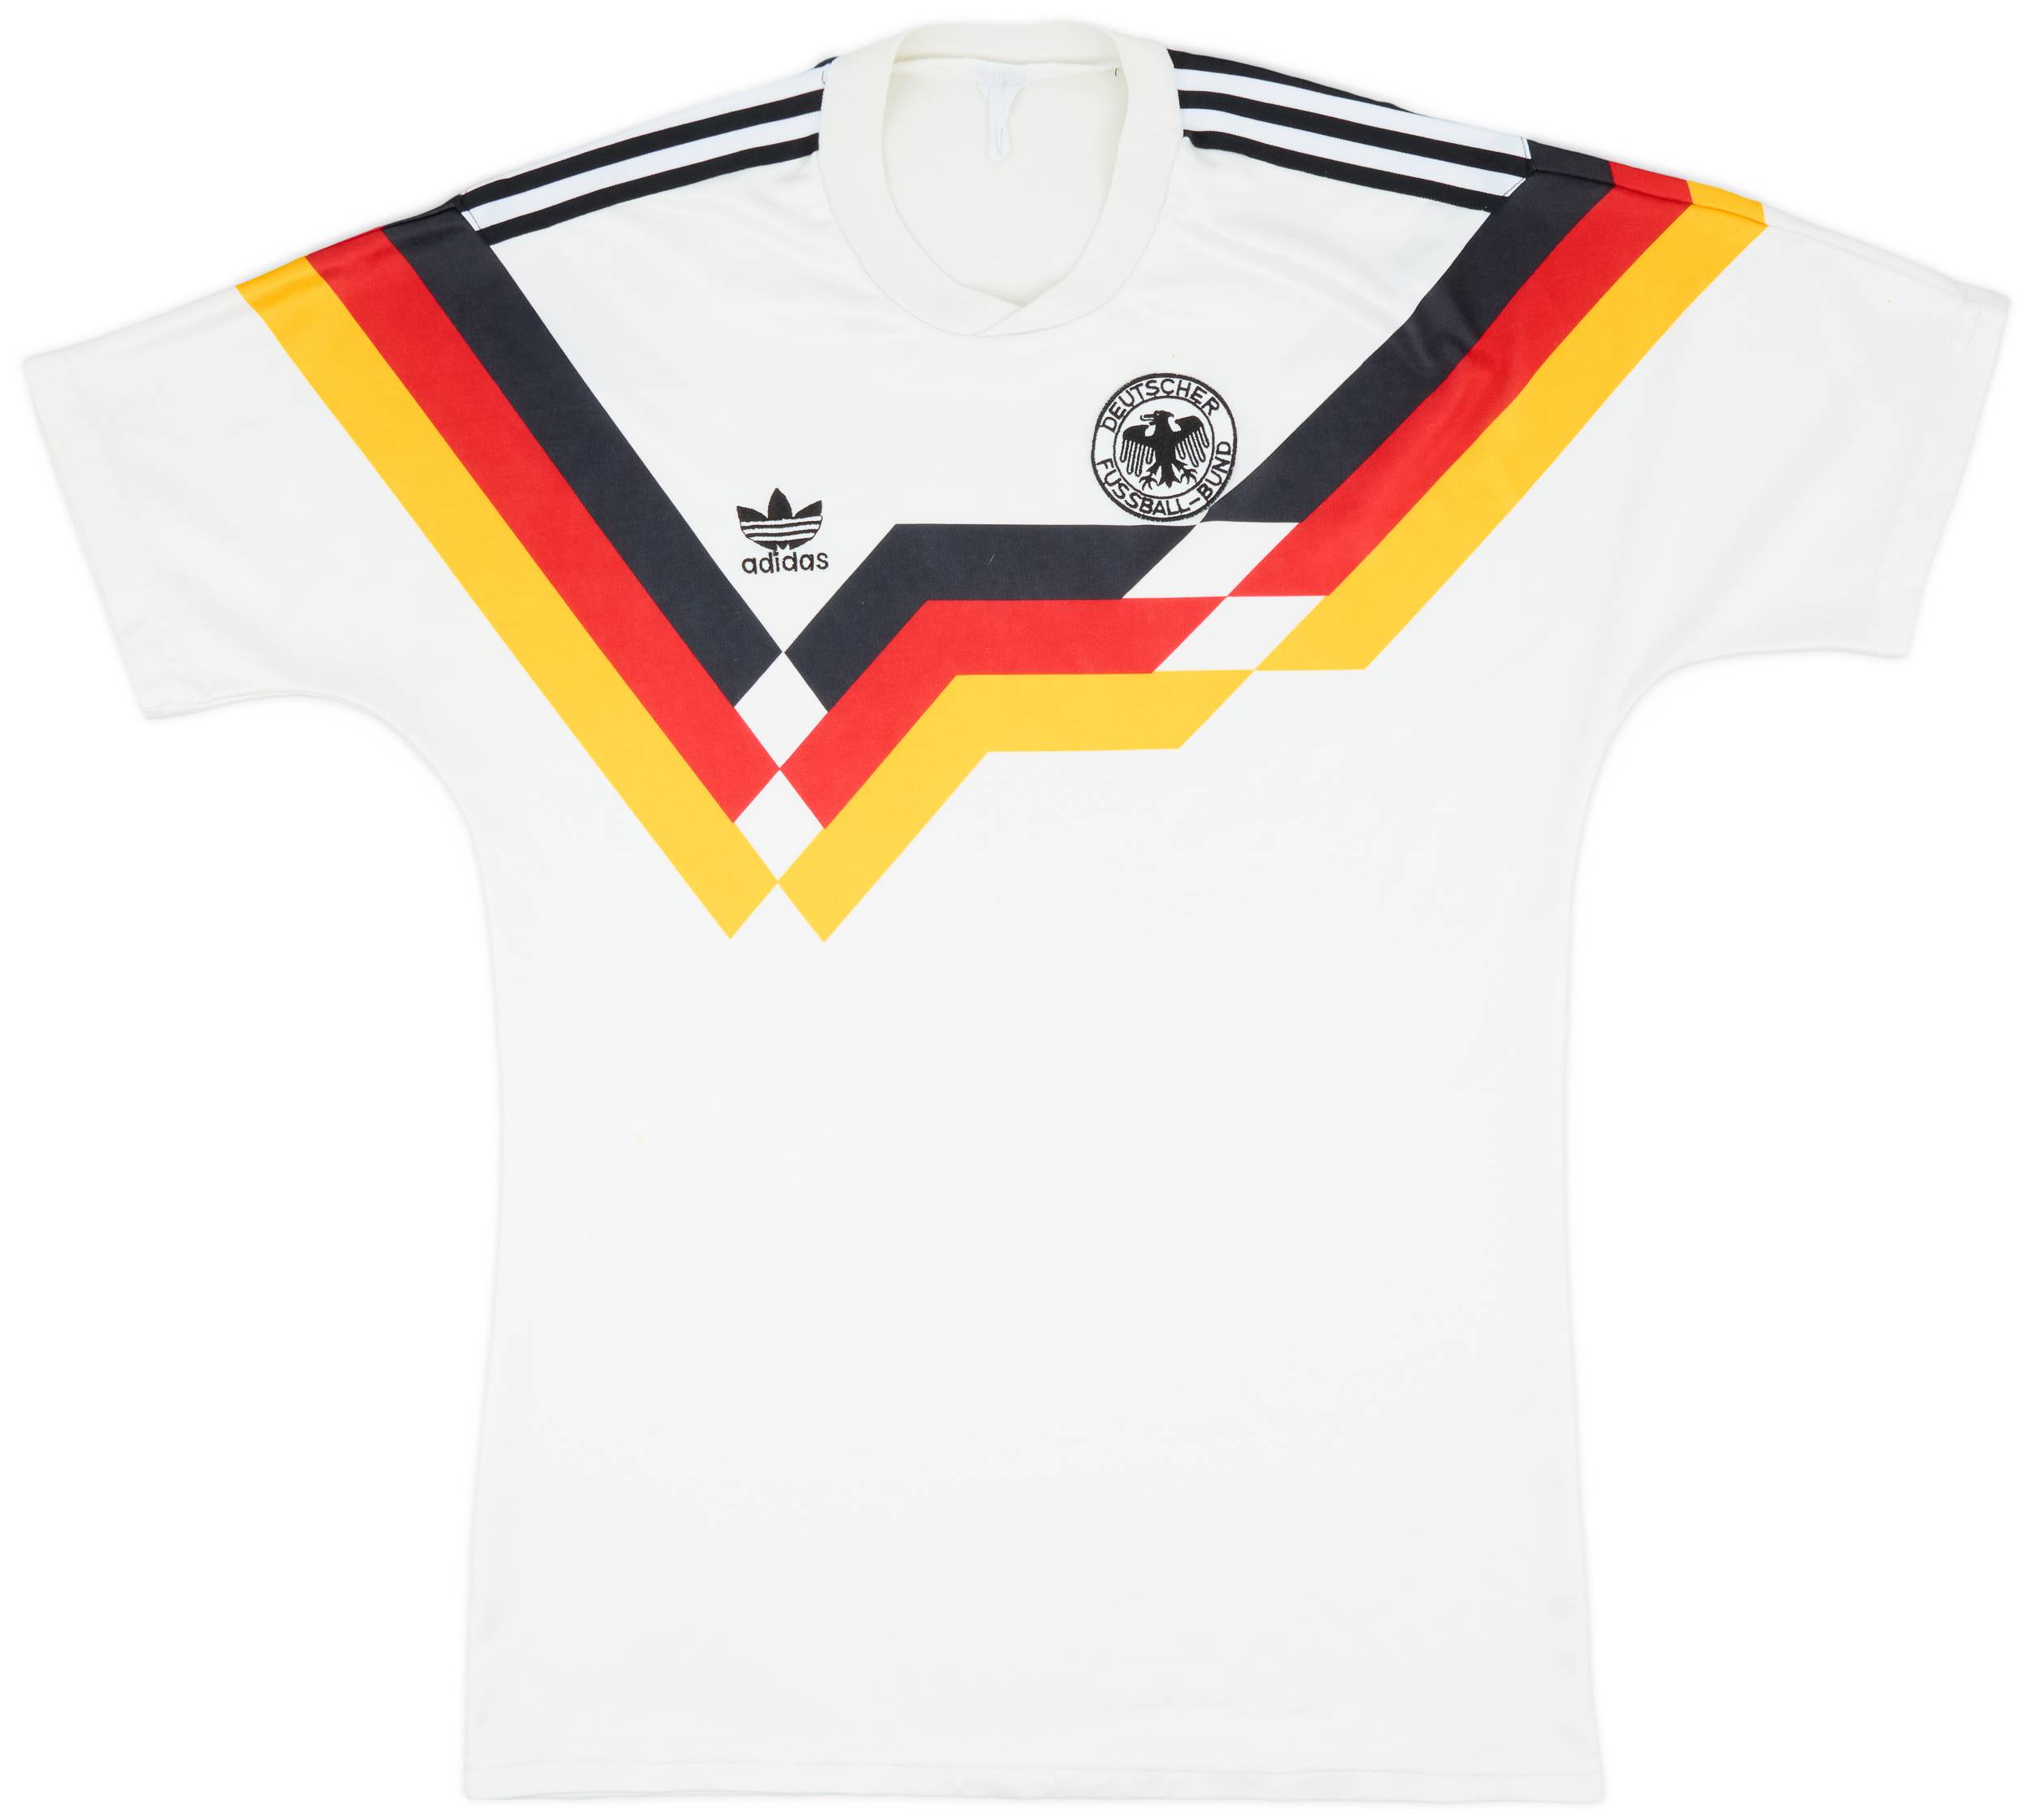 1988-90 West Germany Home Shirt - 8/10 - (L)